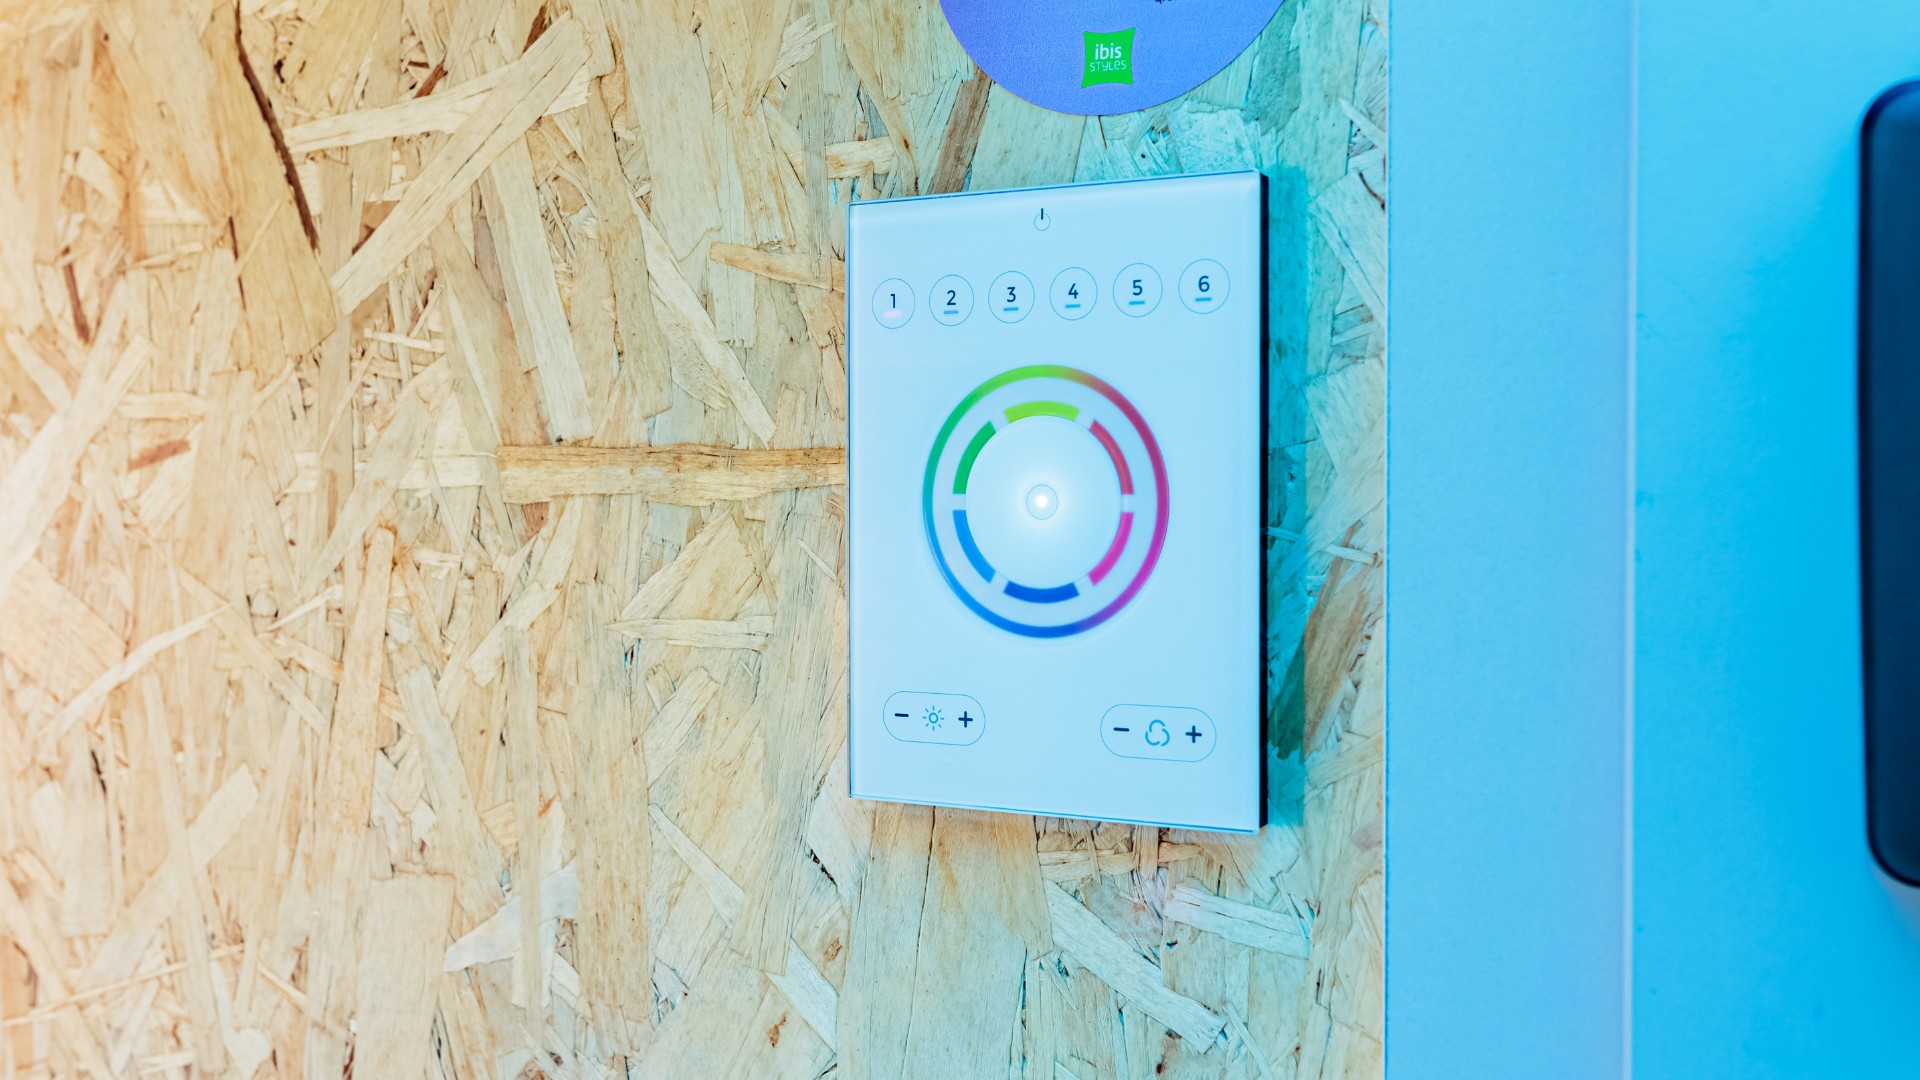 Panel that lets you adjust air ventilation and color your stay with custom LED lighting